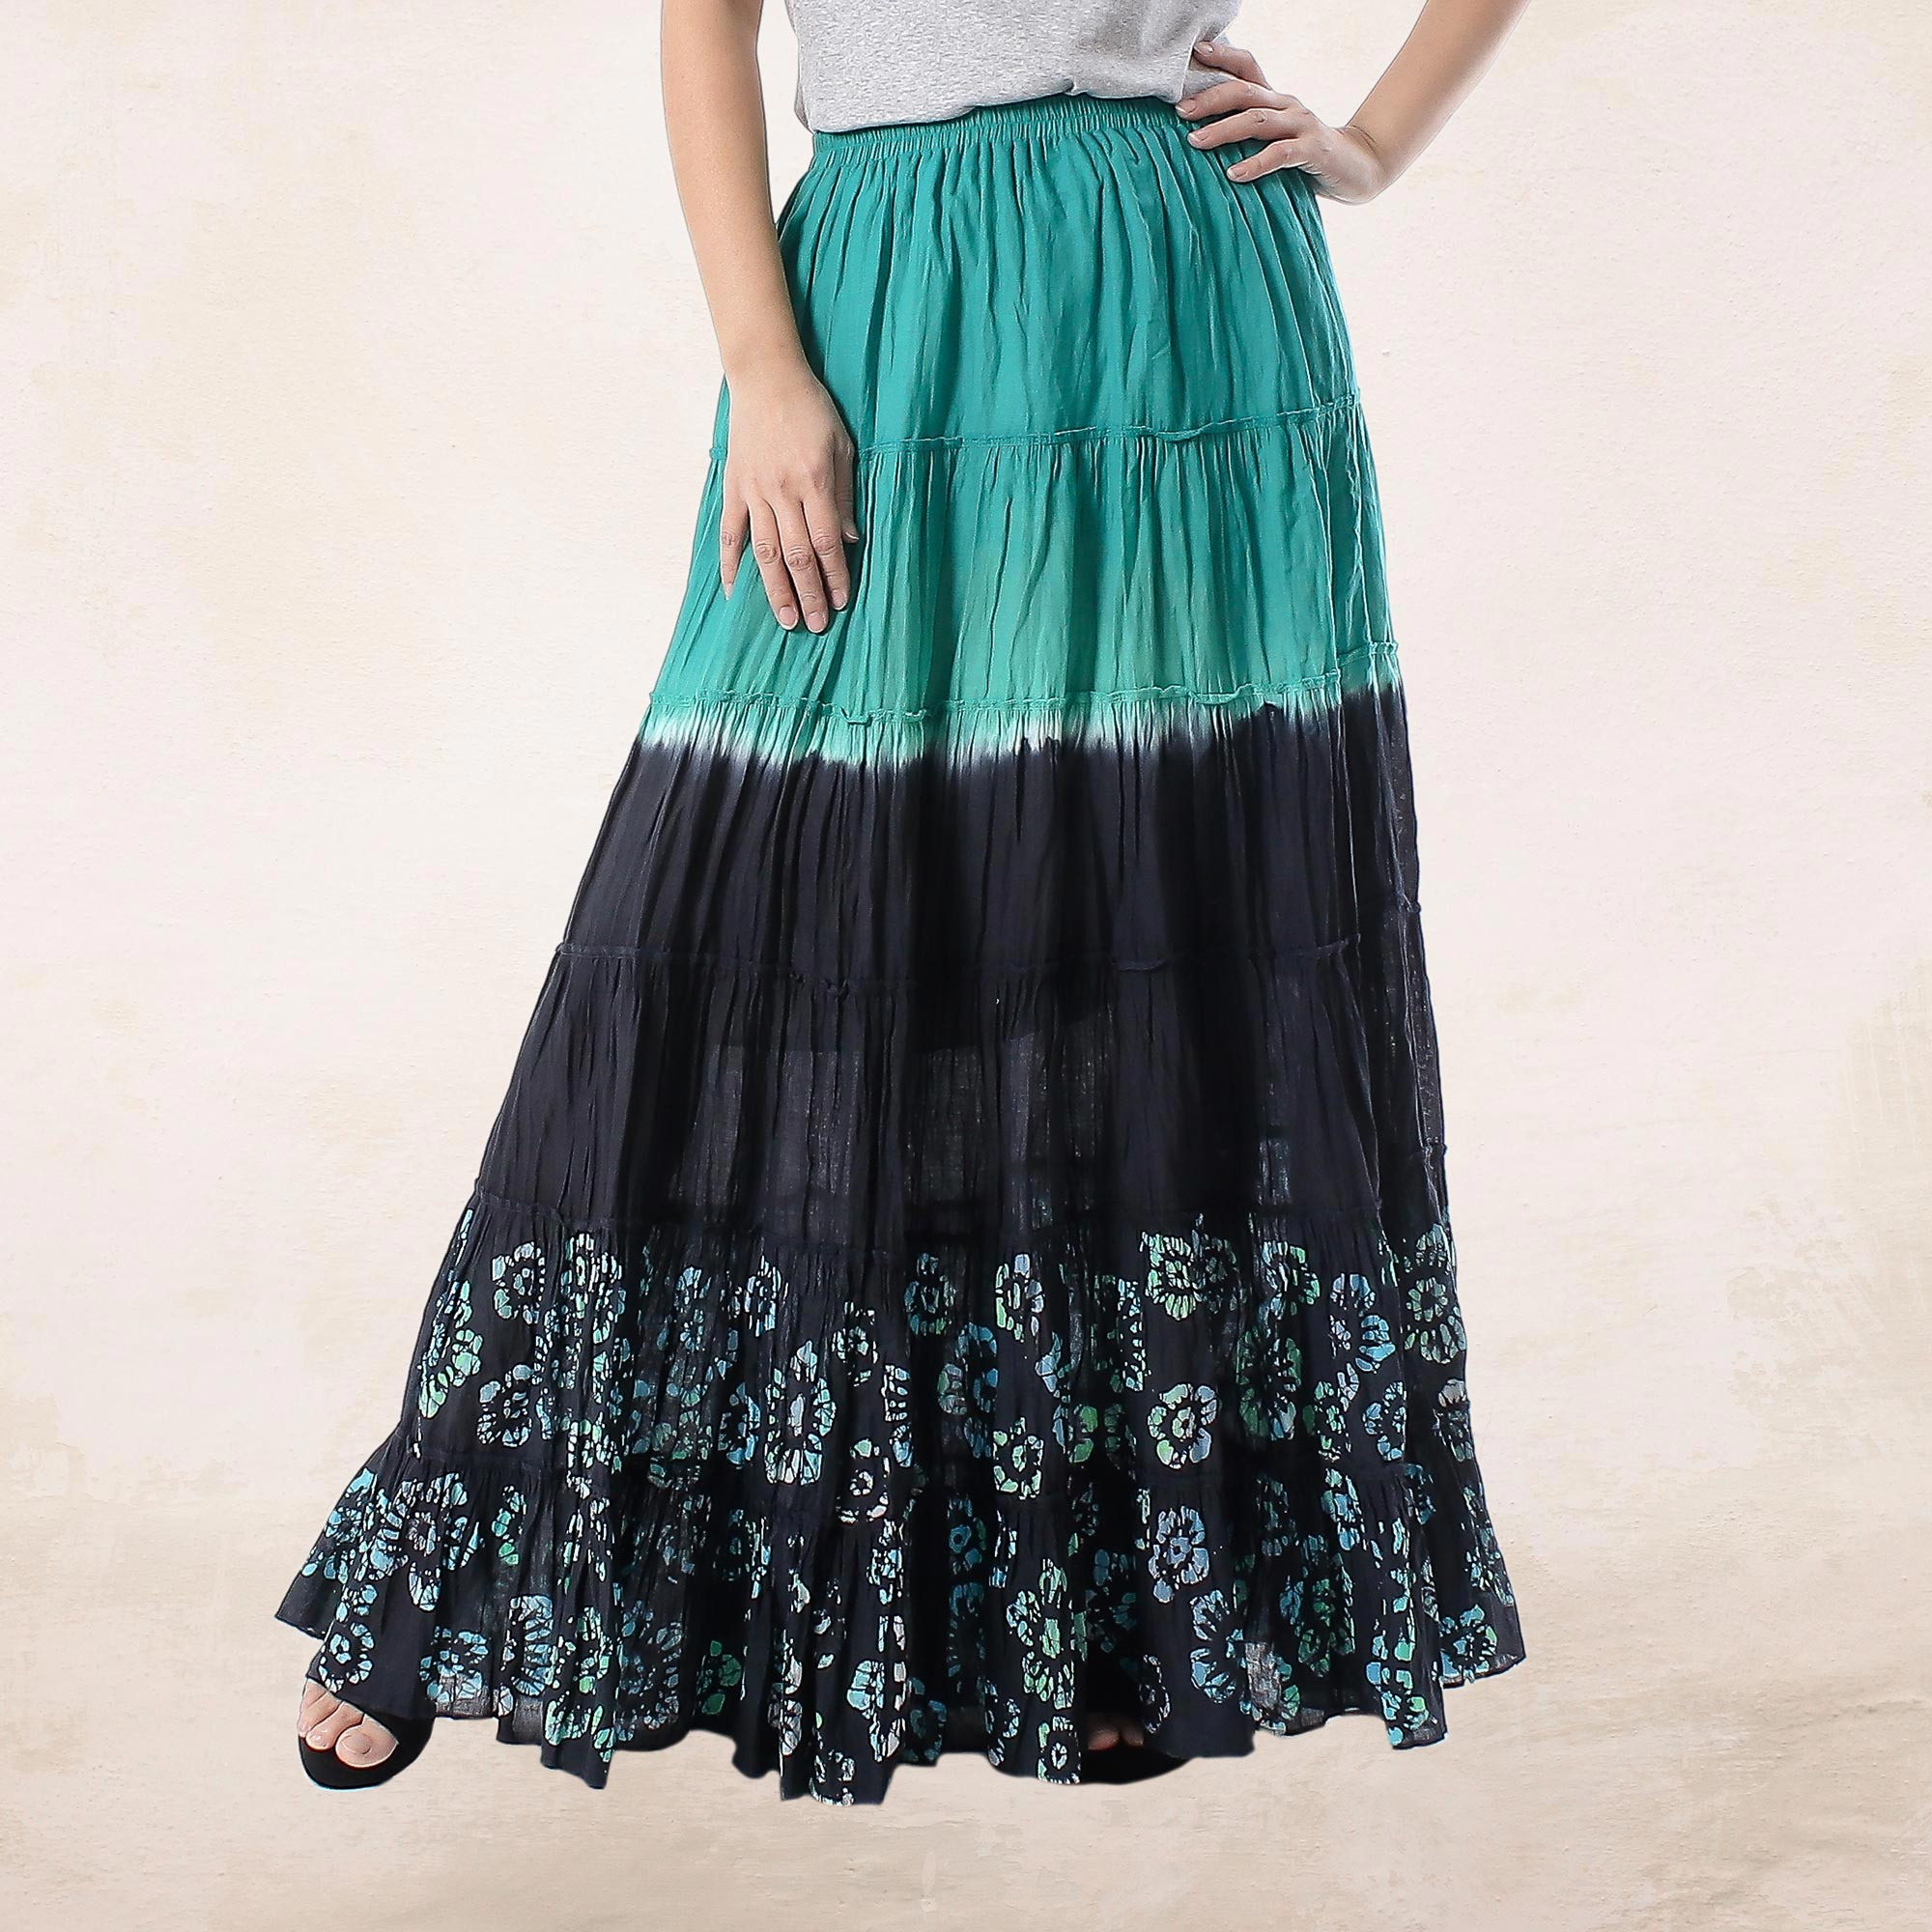 Thai elephant pattern skirt and dress for woman100/% cotton cloth